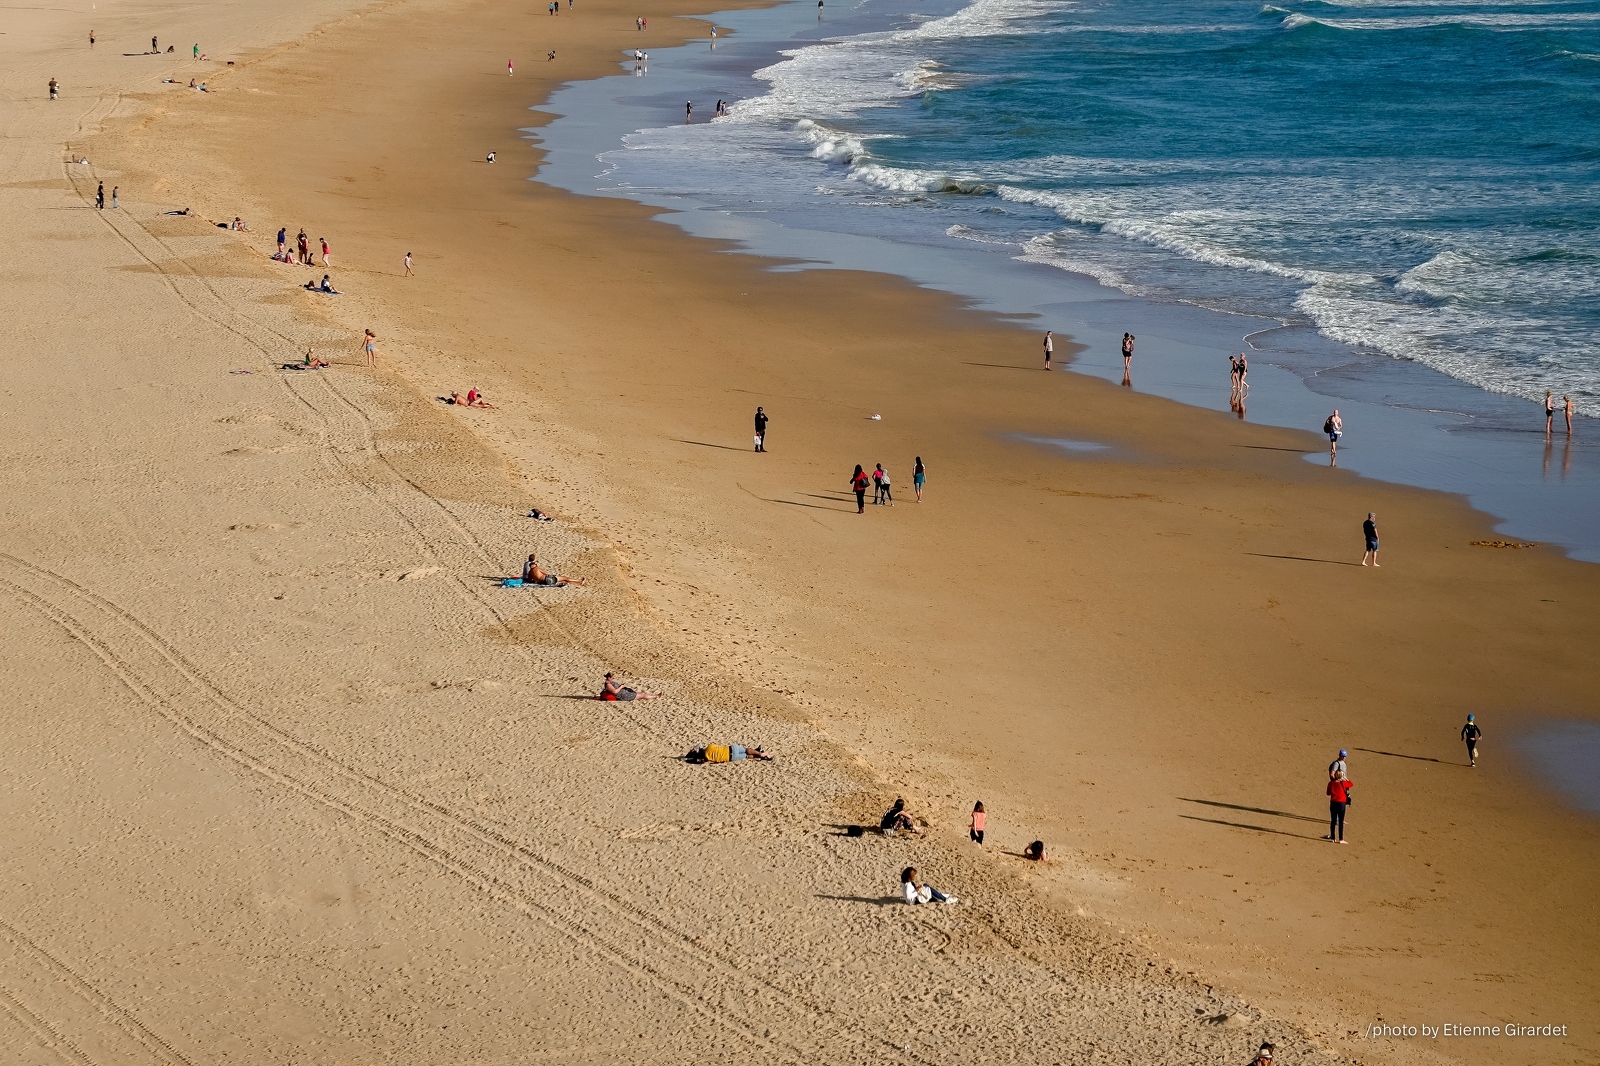 201811_01_RXX2222-beach-sea-people-from-above-by-E-Girardet.jpg